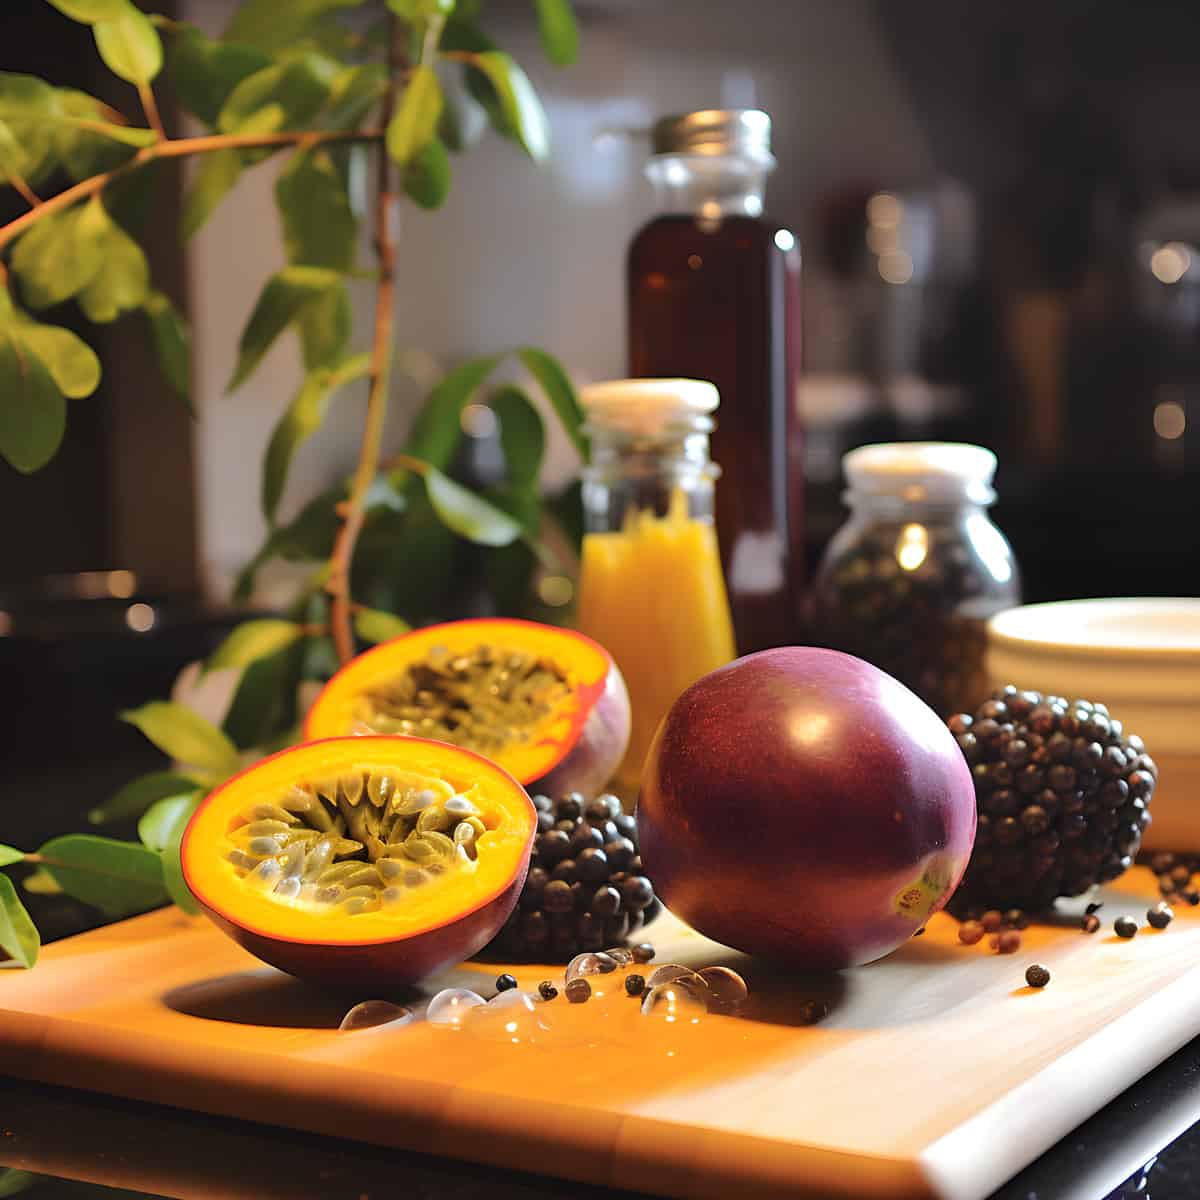 Perfumed Passionfruit on a kitchen counter